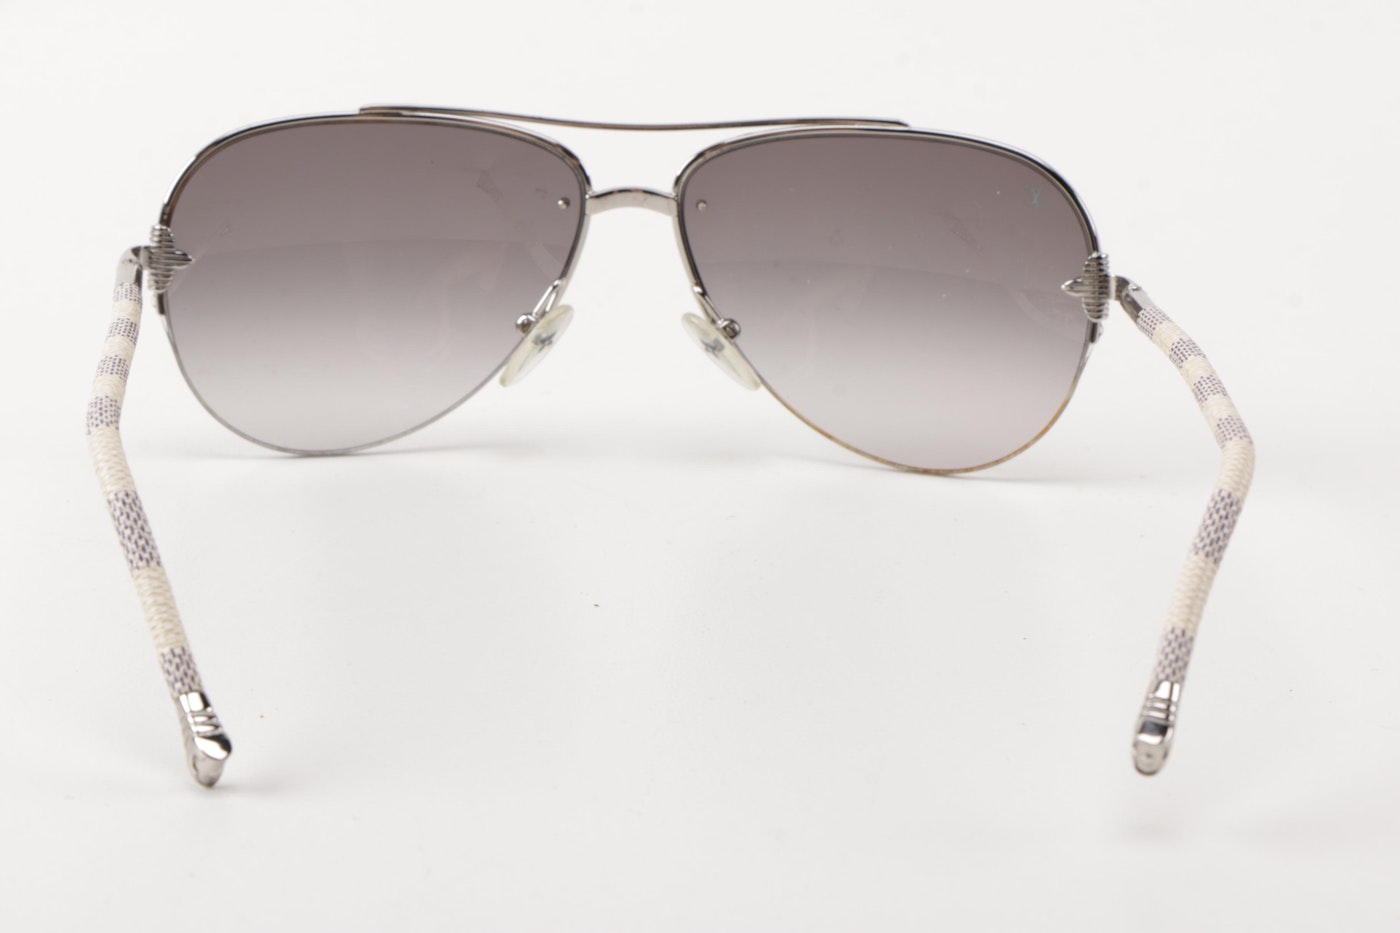 Louis Vuitton Pre-Owned Player Black/Grey Aviator Sunglasses